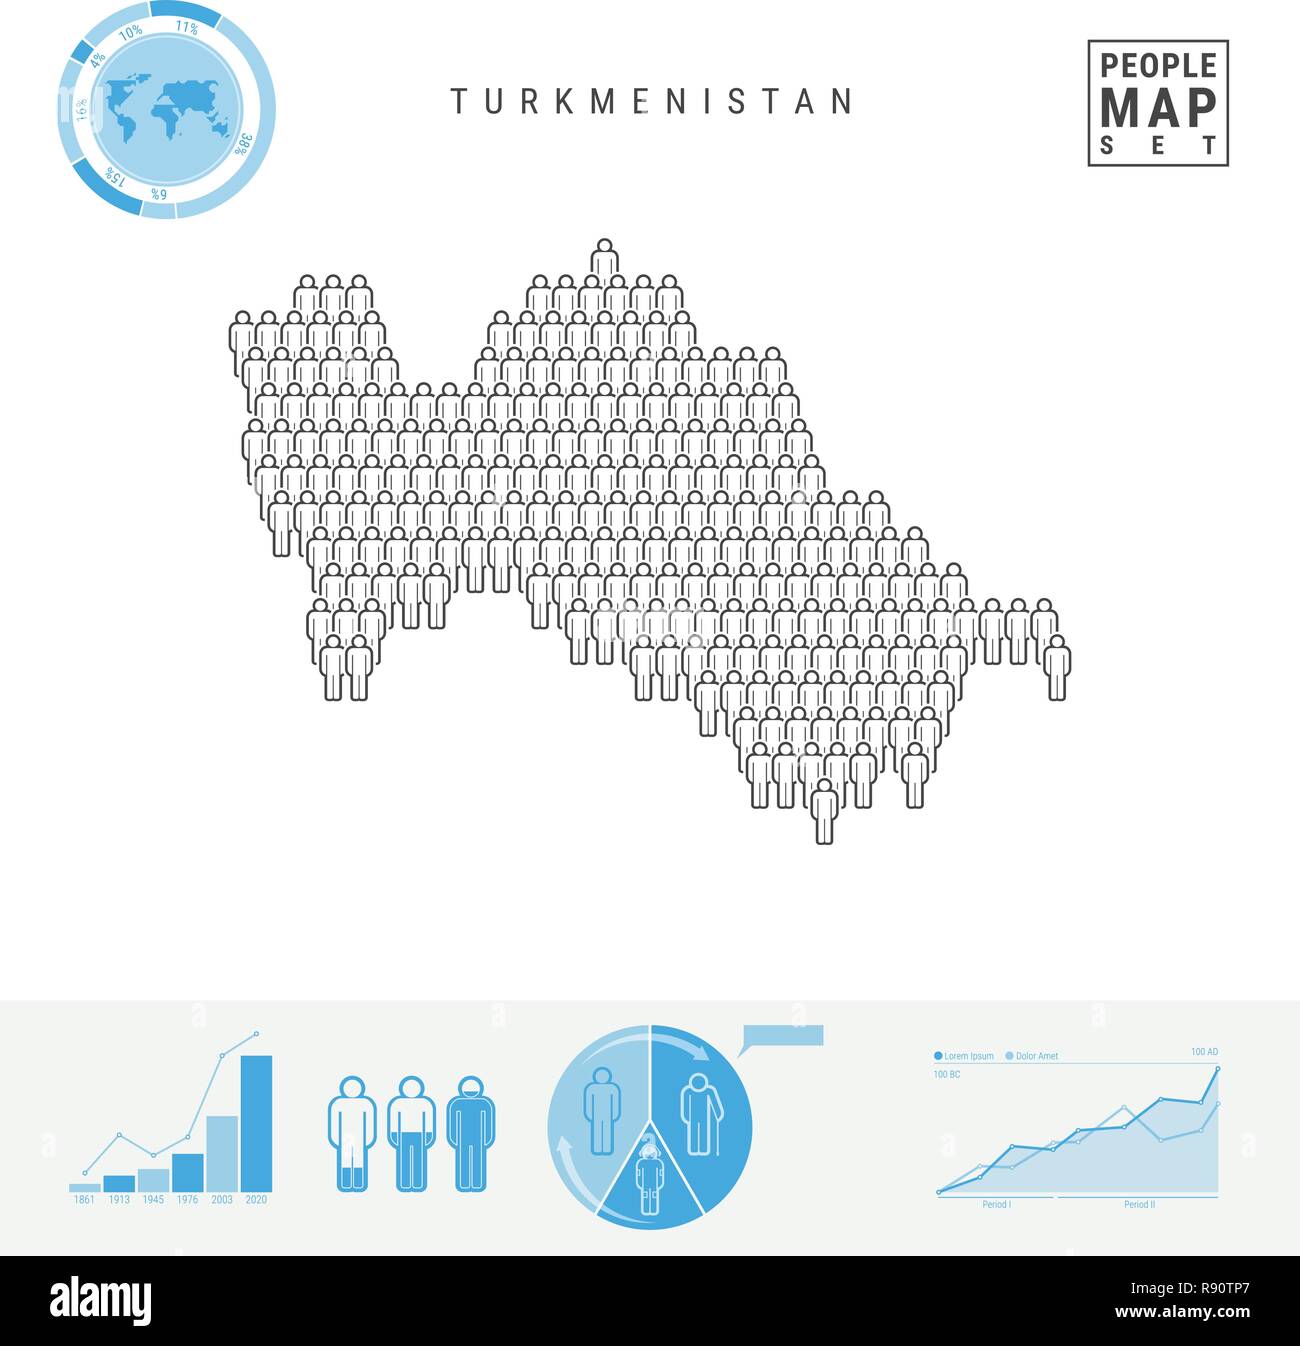 Turkmenistan People Icon Map. Stylized Vector Silhouette of Turkmenistan. Population Growth and Aging Infographics Stock Vector